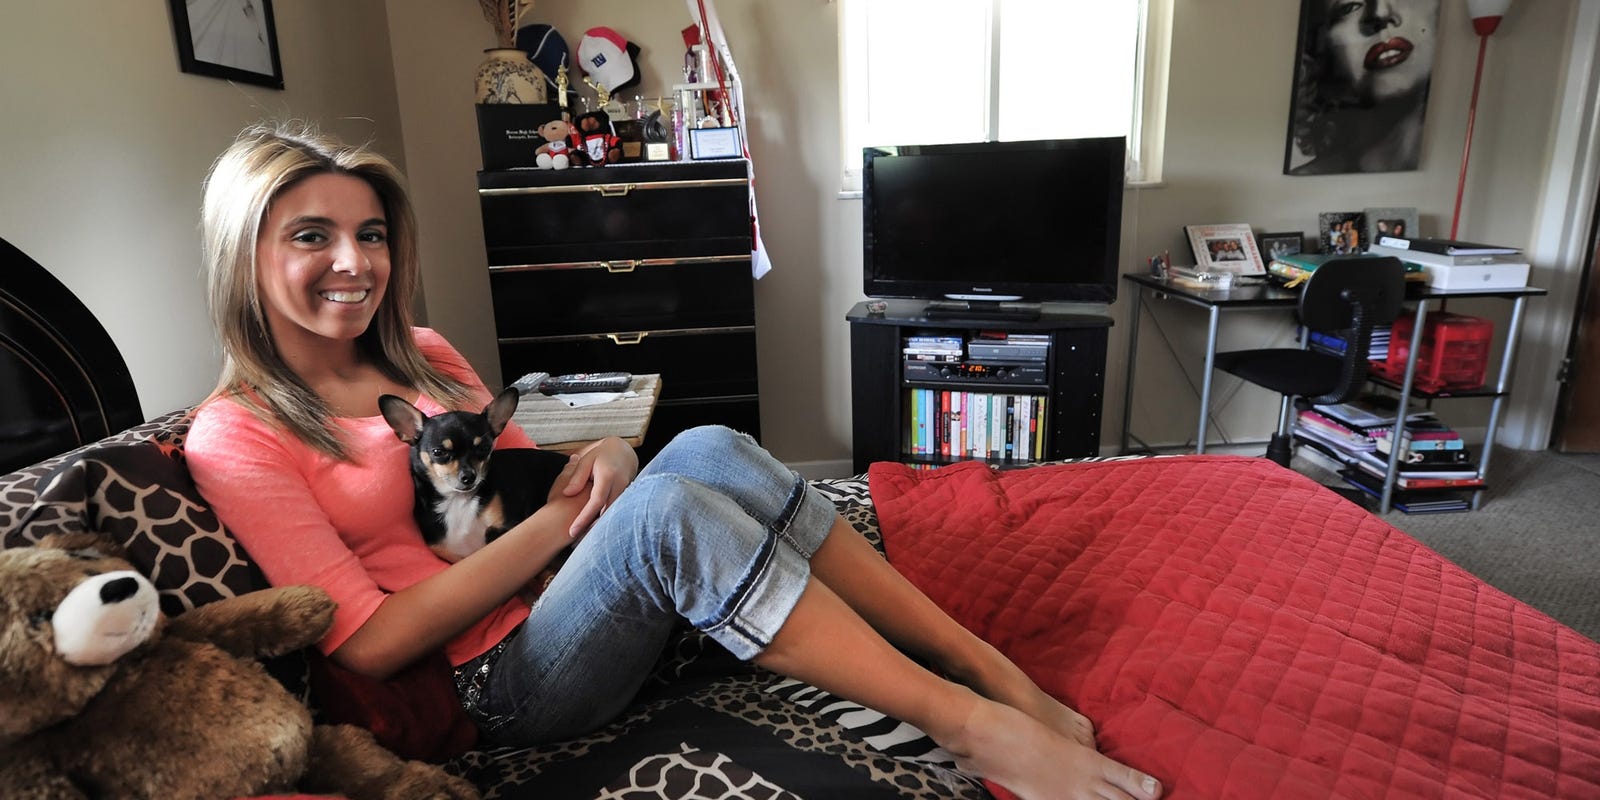 Teen hopes her story of living with HIV helps others